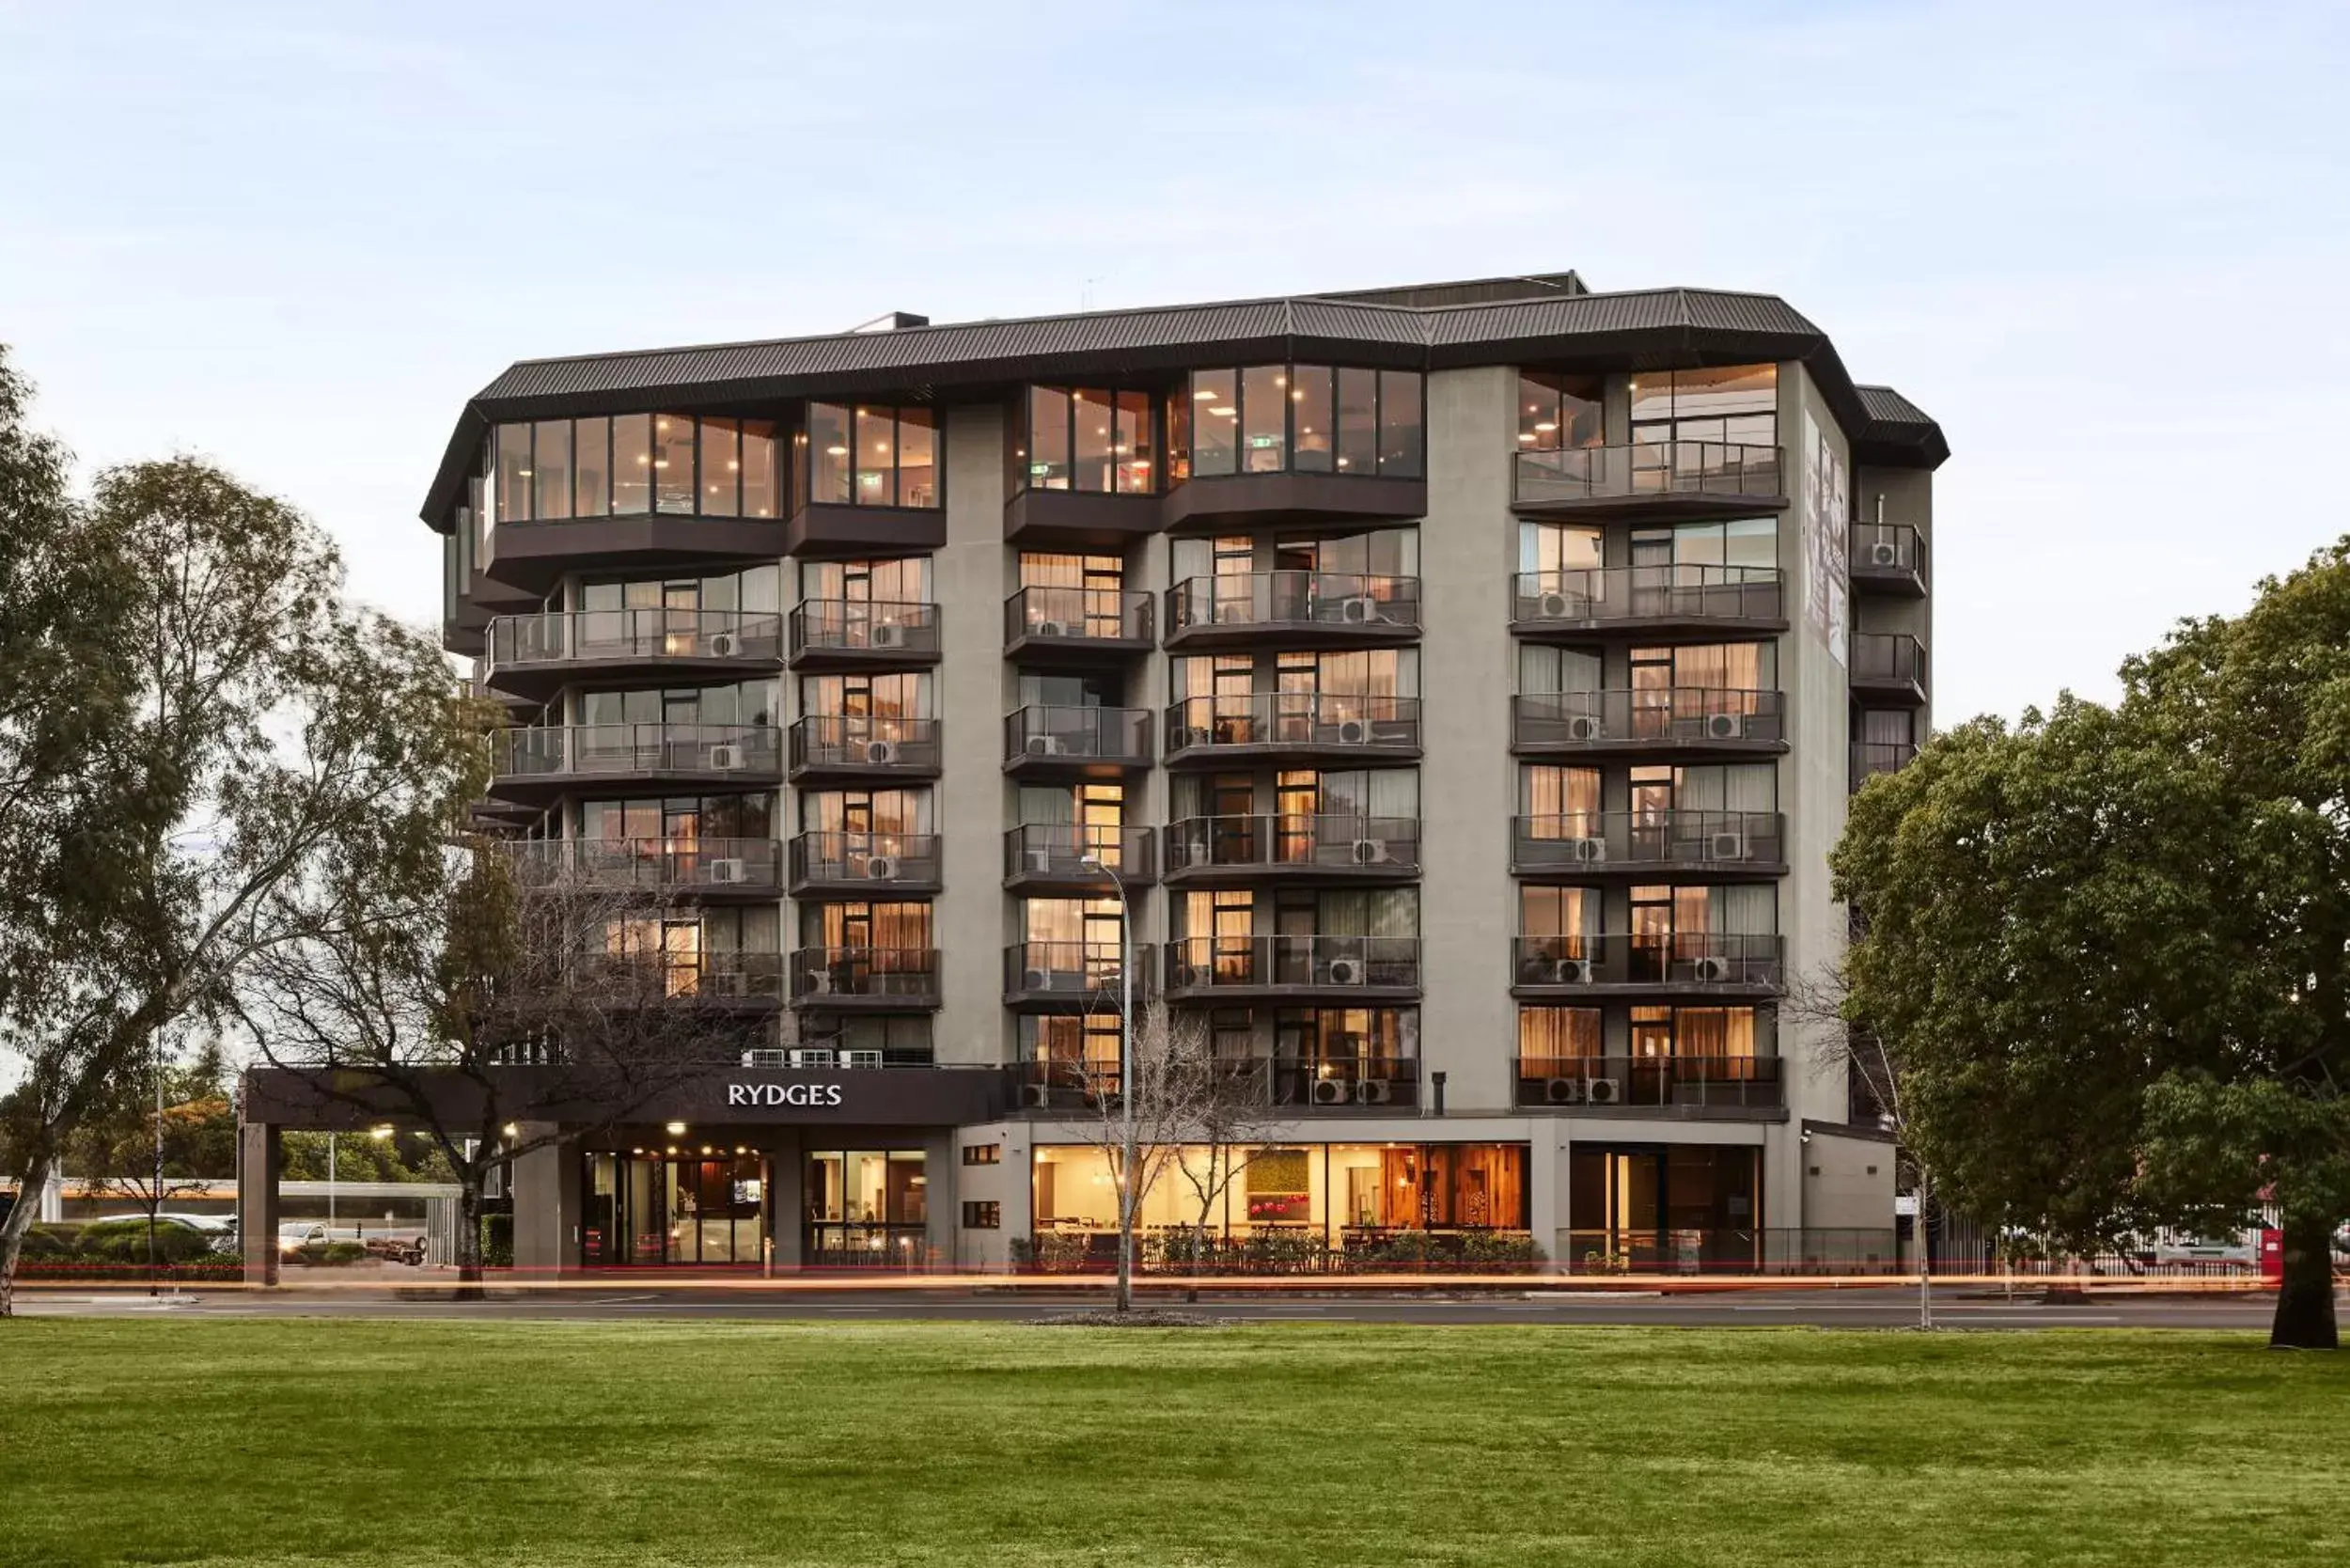 Property Building in Rydges South Park Adelaide